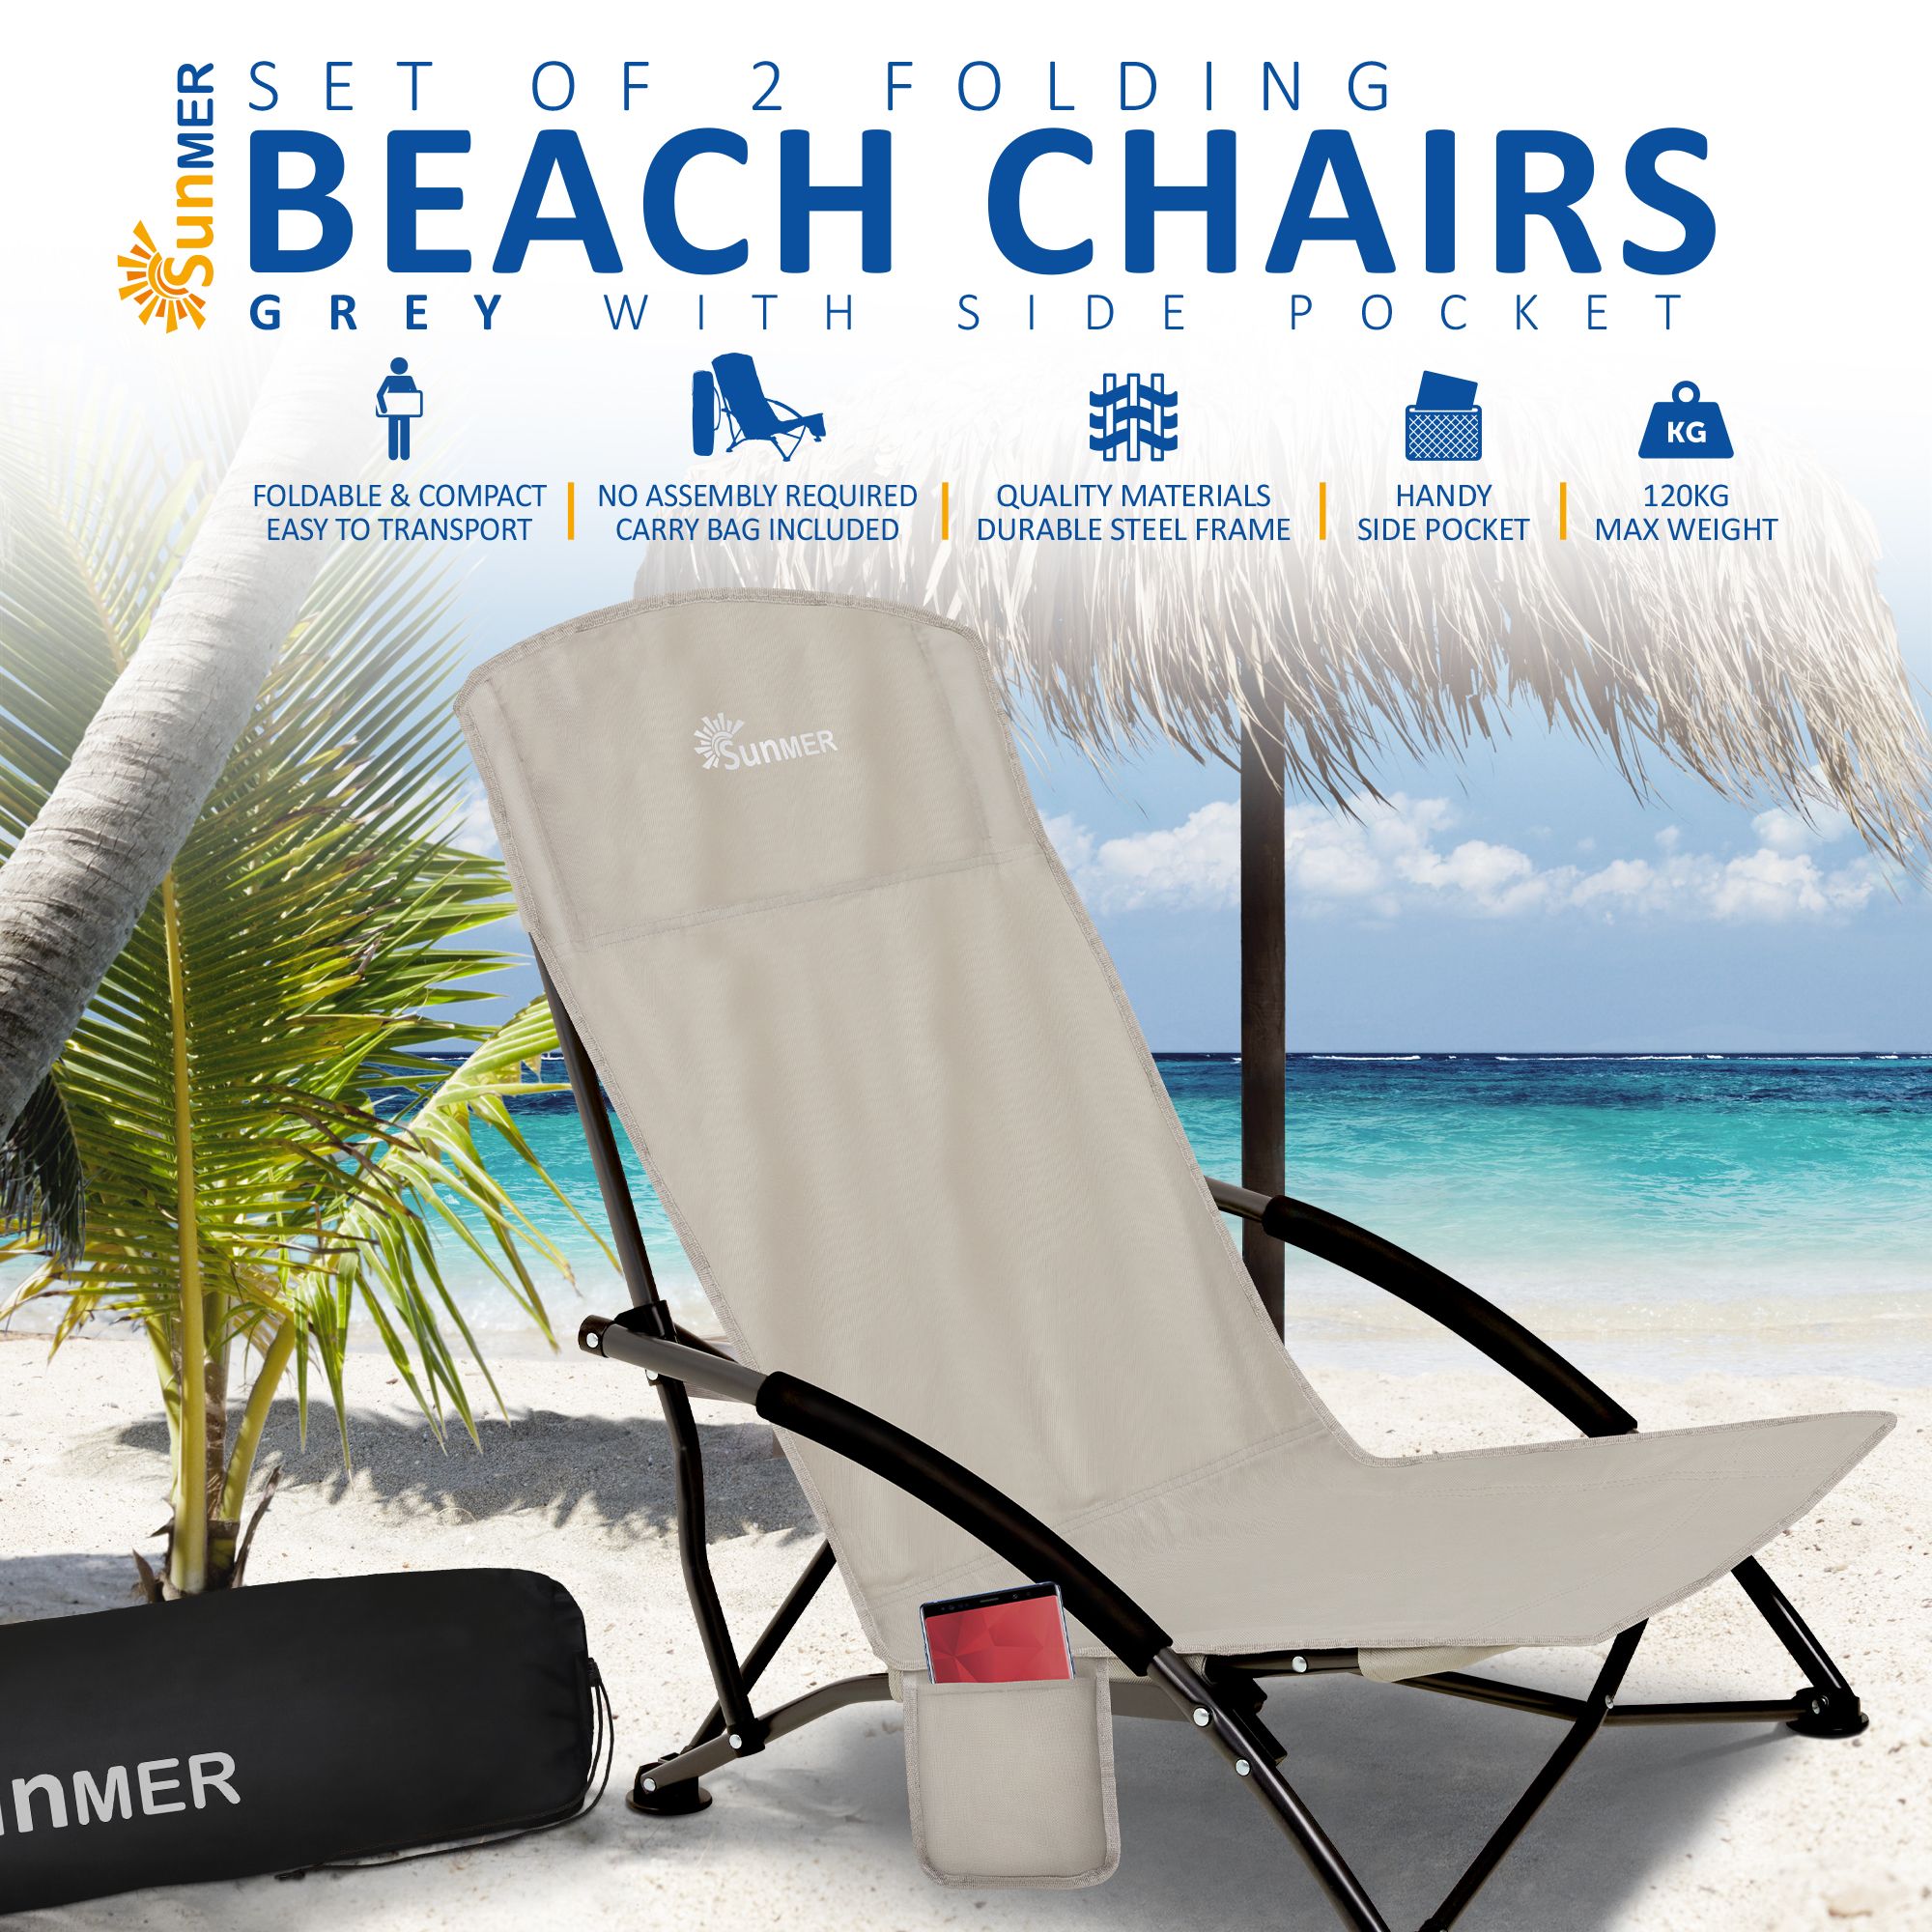 SUNMER Set of 2 Folding Beach Chair with Side Pocket & Carry Bag - Grey